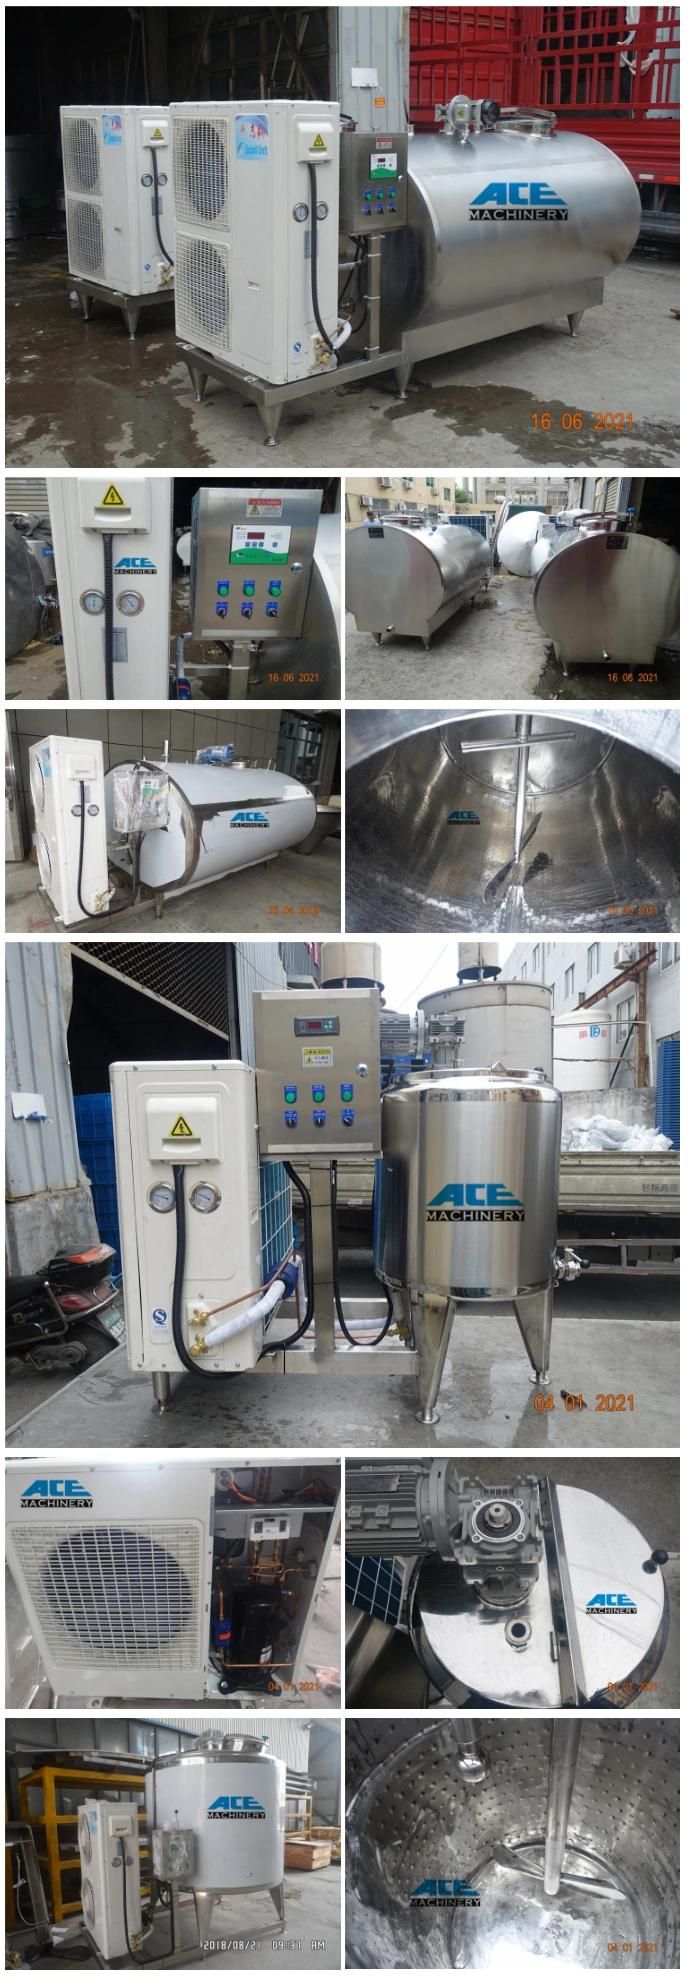 Price of Chemical Industrial Alcohol Water Milk Fuel Oil Liquid Stainless Steel Pressure Cooling Fermentation Extraction Mixing Storage Tank